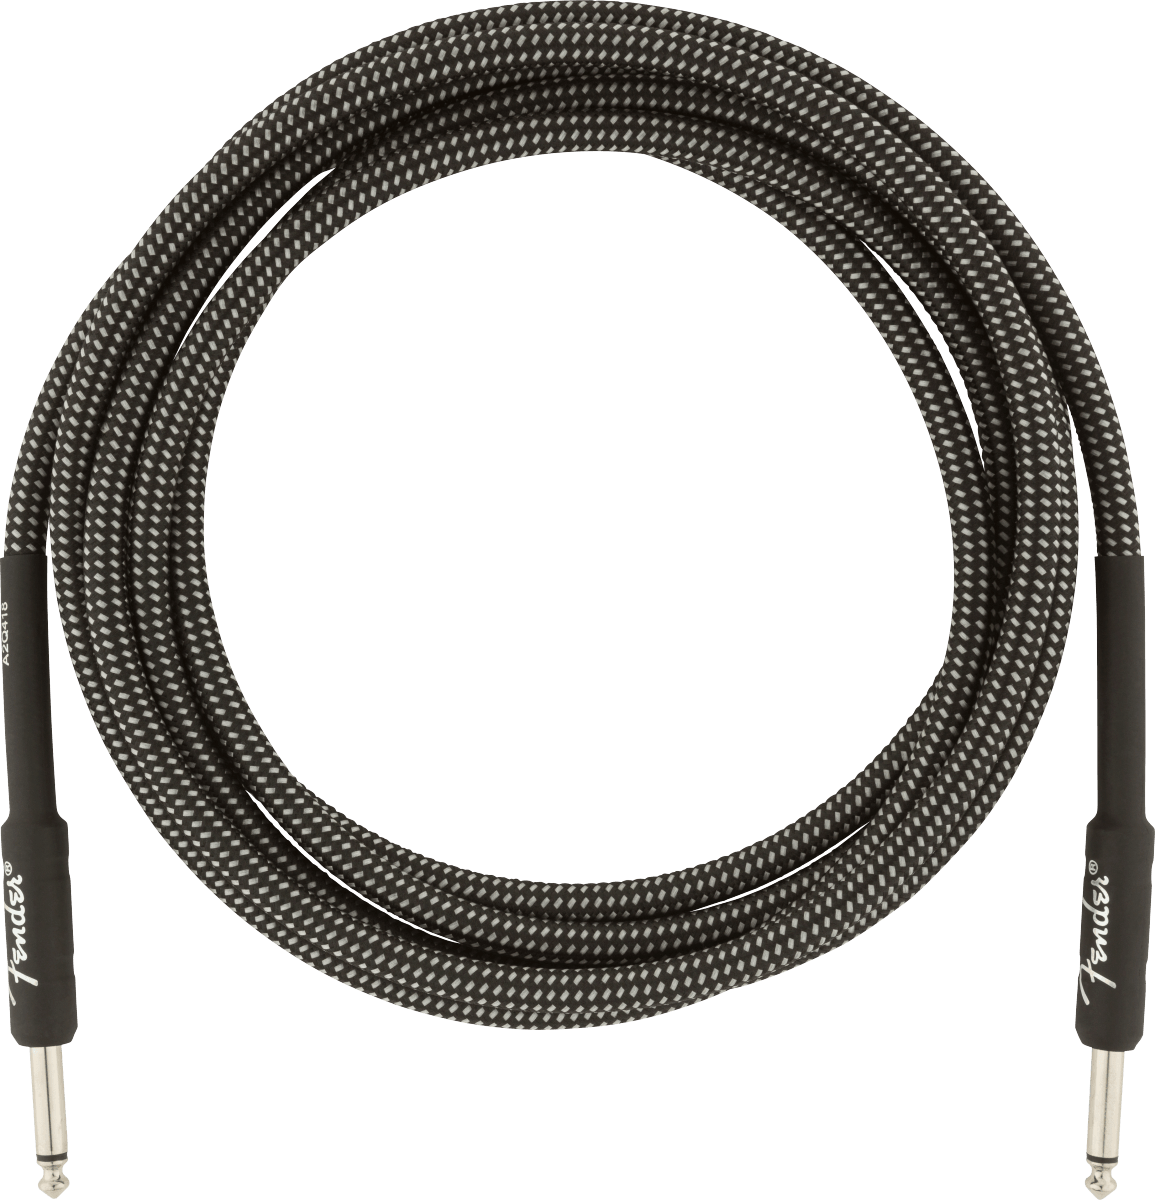 Professional Series Instrument Cables 10 Gray Tweed - Muso's Stuff